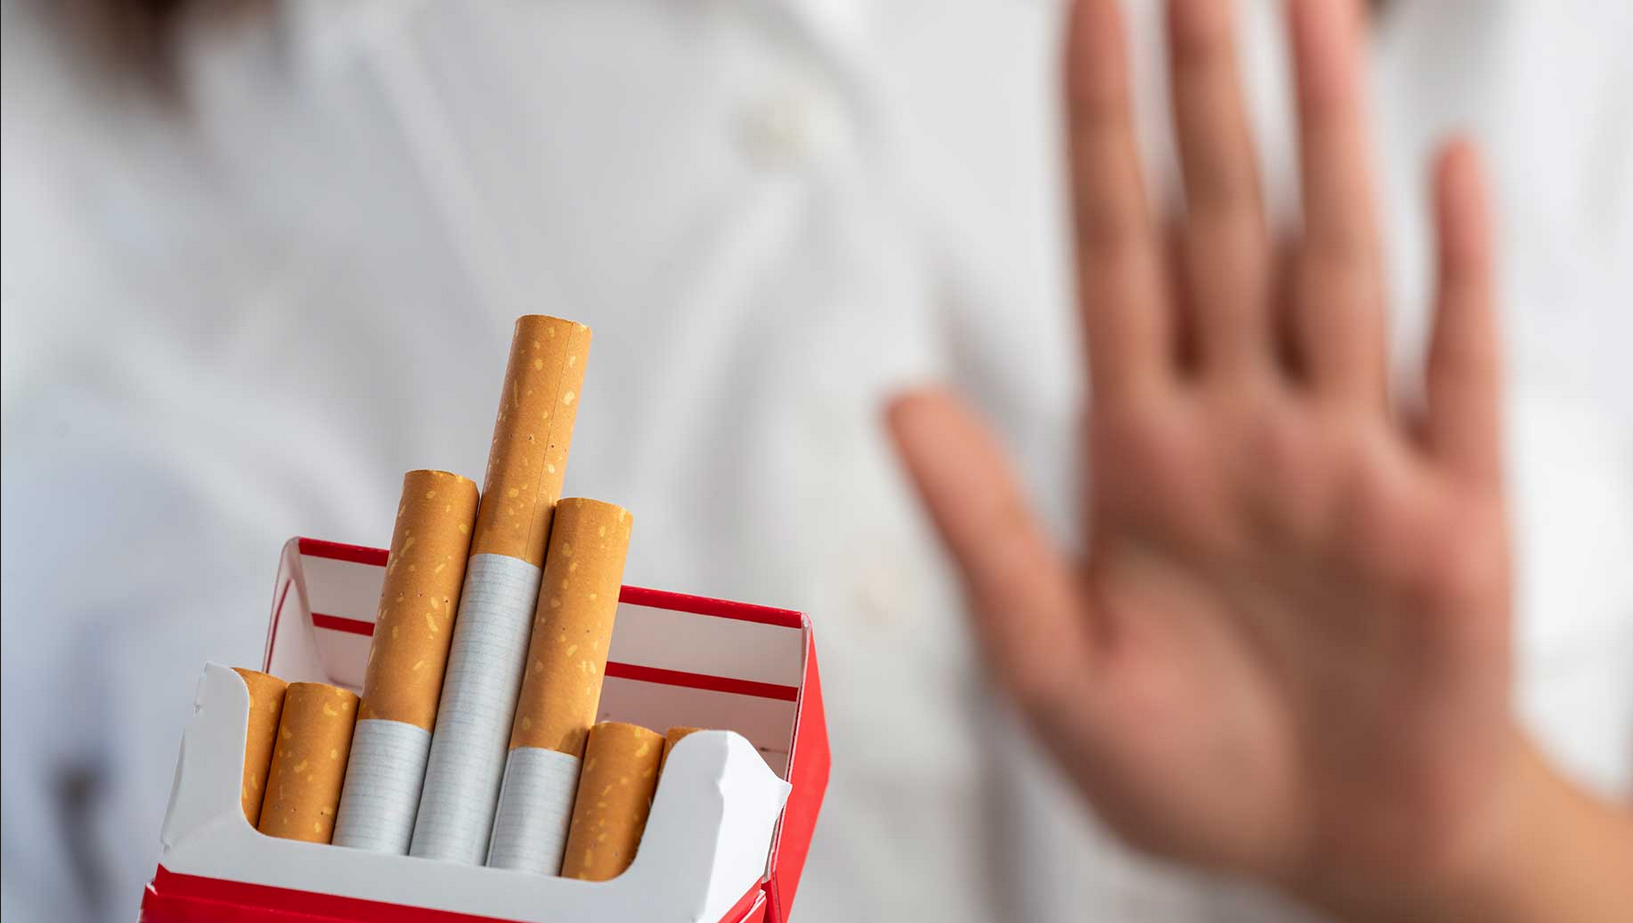 38% men, 9% women above 15 years use tobacco products